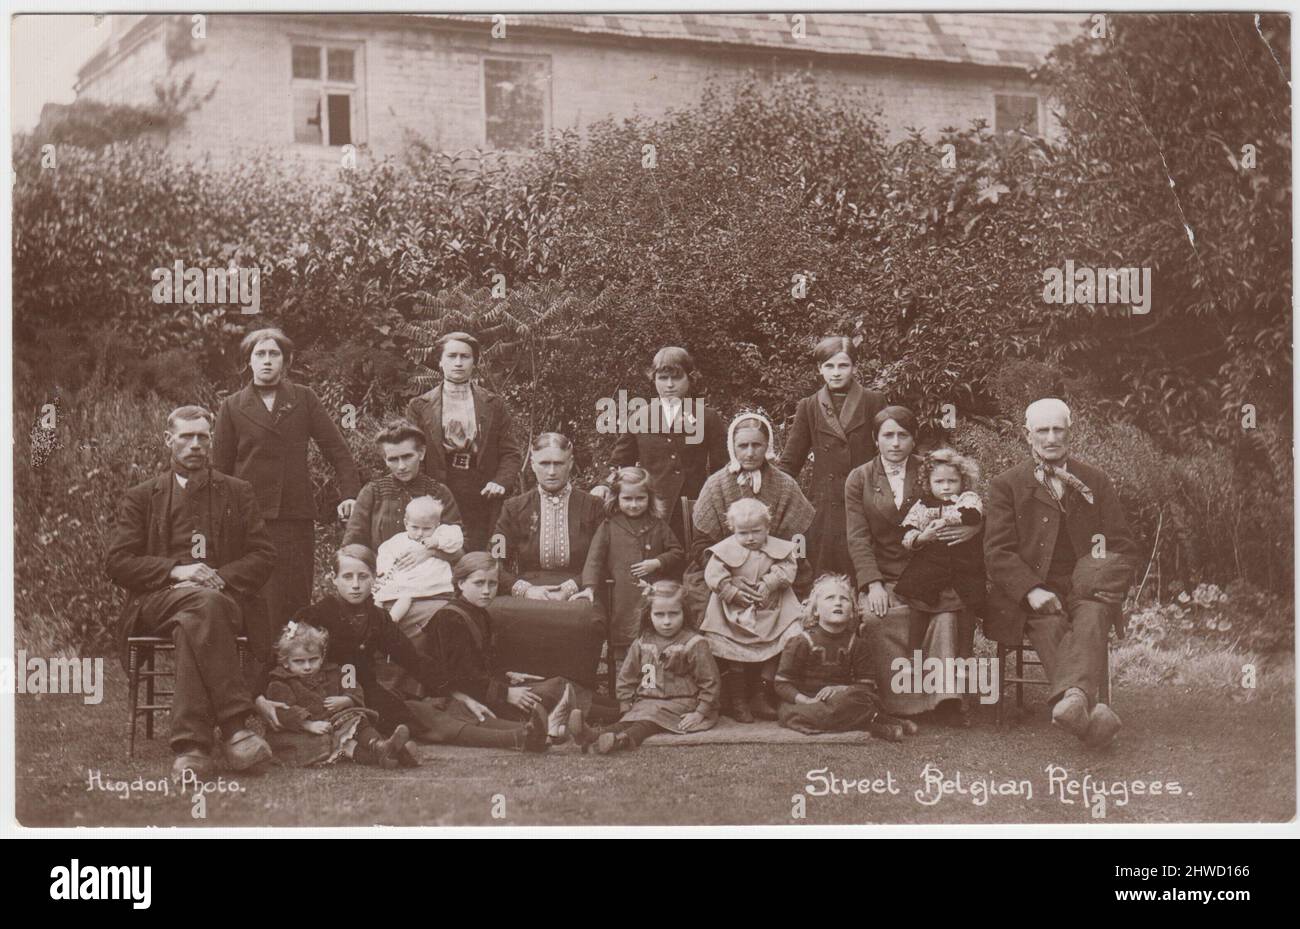 Belgian refugees in Street, Somerset, during the First World War. The group includes men, women and children (including babies) photographed in the garden of a large house. Members of the De Baecke family were amongst the Belgian refugees who took refuge in Street Stock Photo